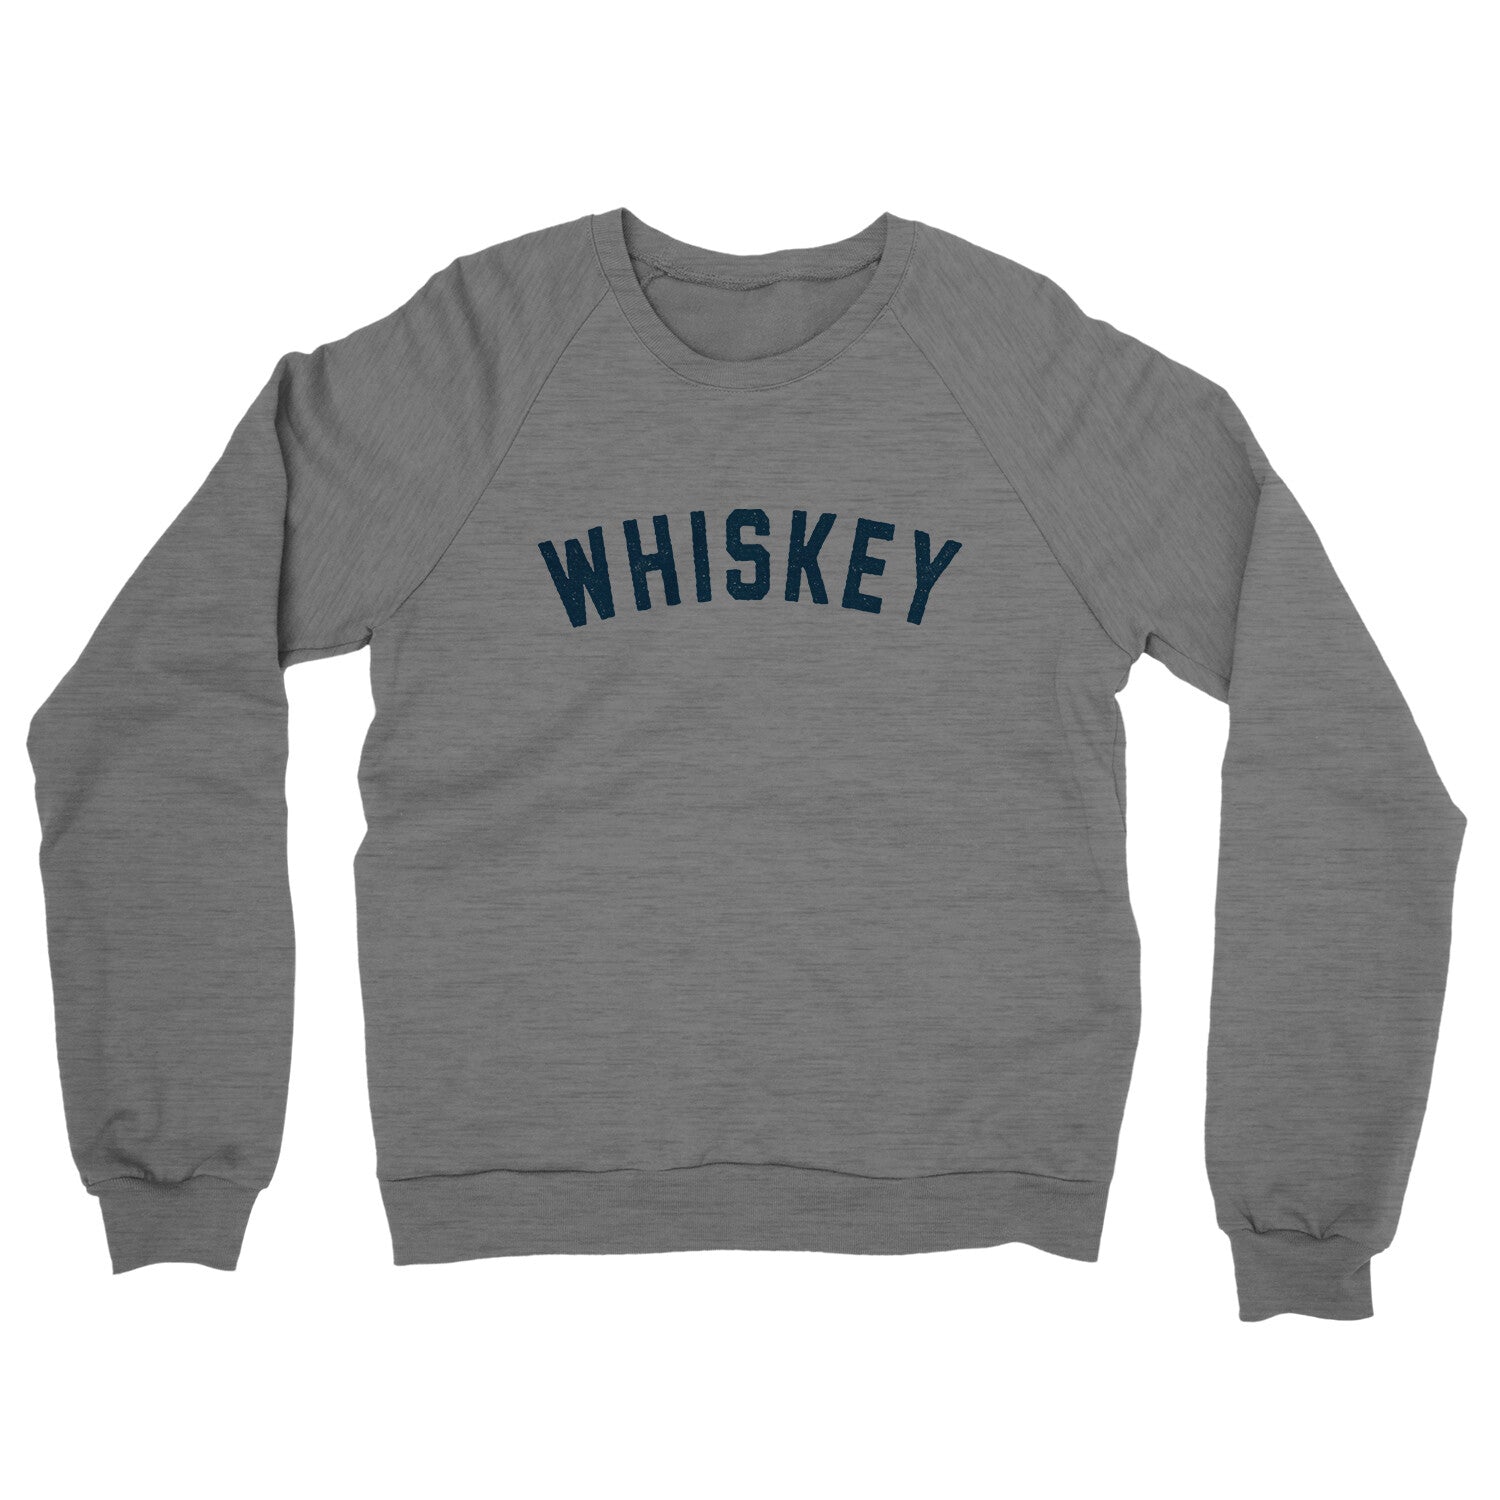 Whiskey in Graphite Heather Color